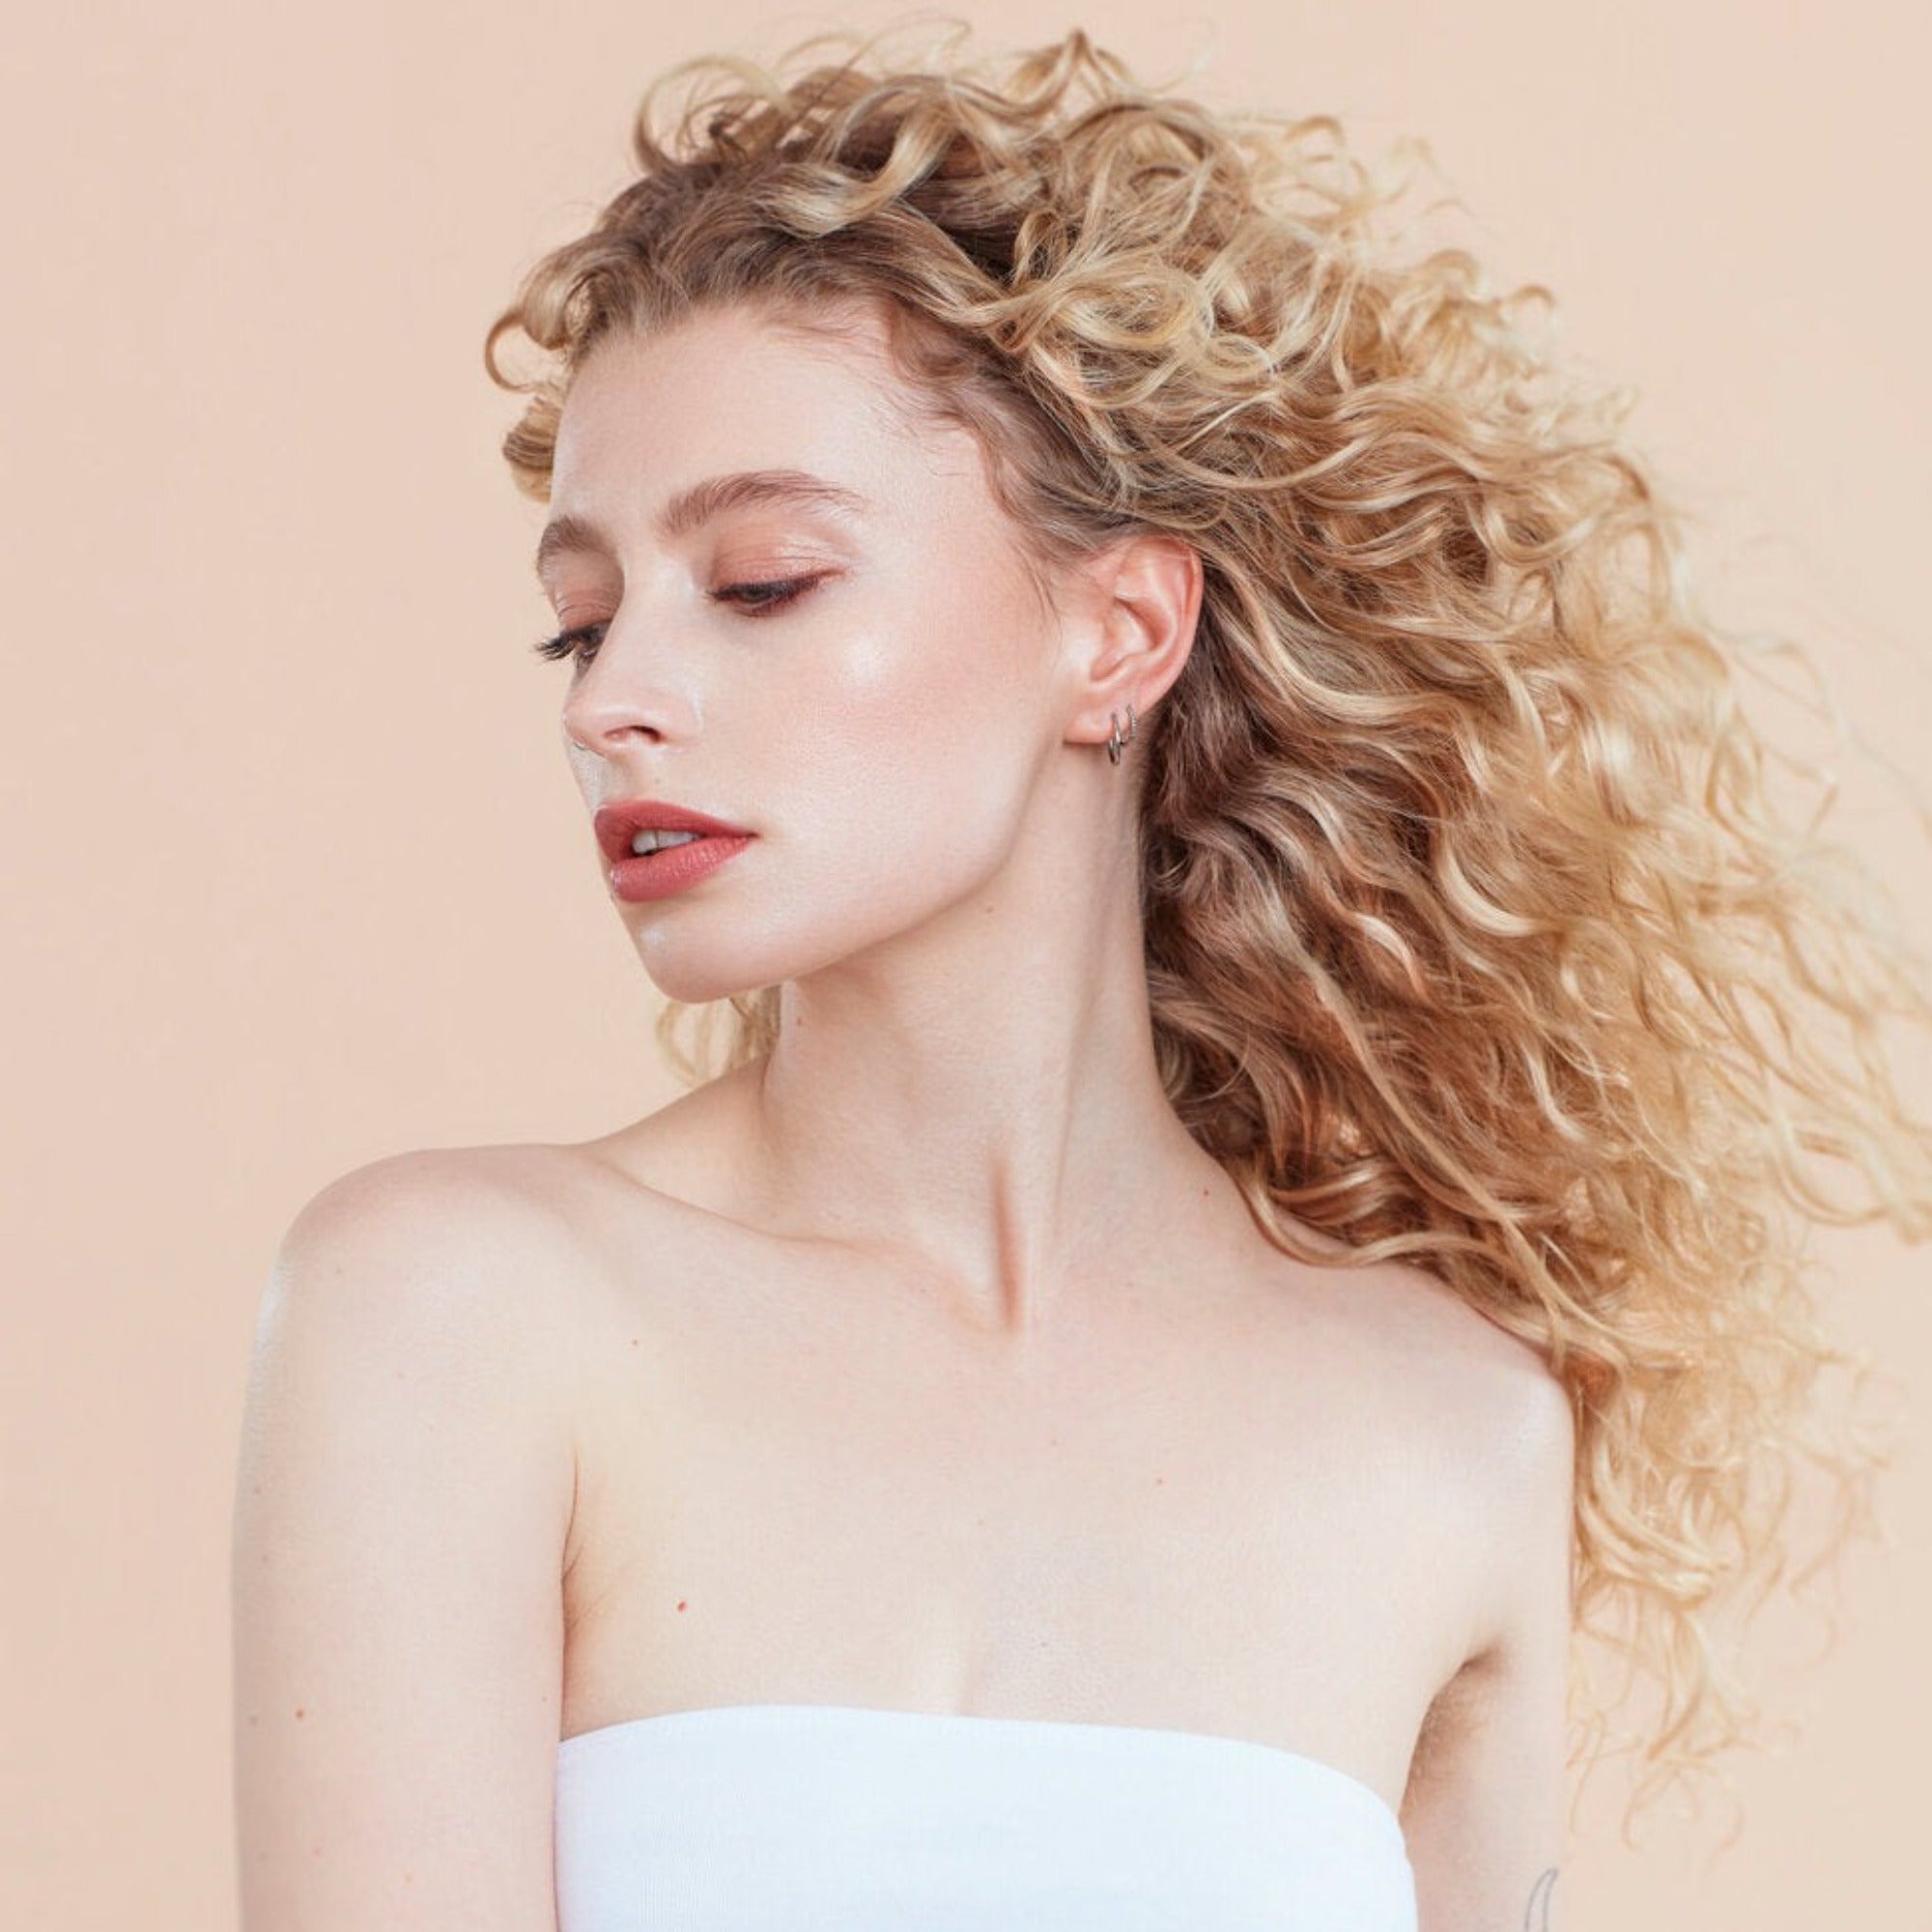 Female model with blond curly hair with moo and yoo products in her hair. She is looking to her right and her hair is flowing. She is wearing a white bandeau.